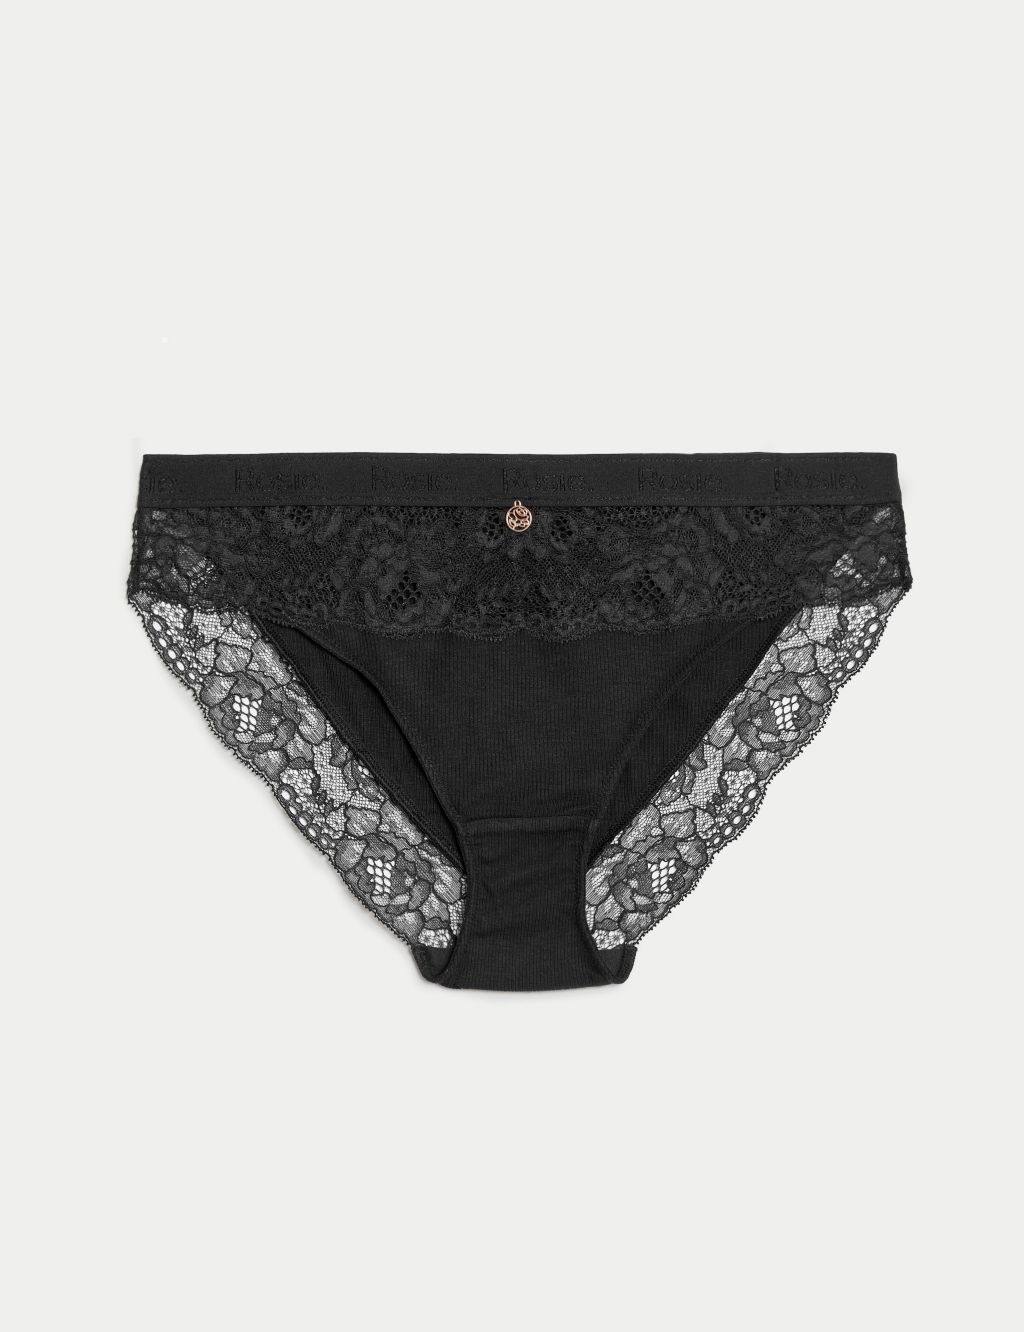 Ribbed Lounge Lace High Leg Knickers image 2